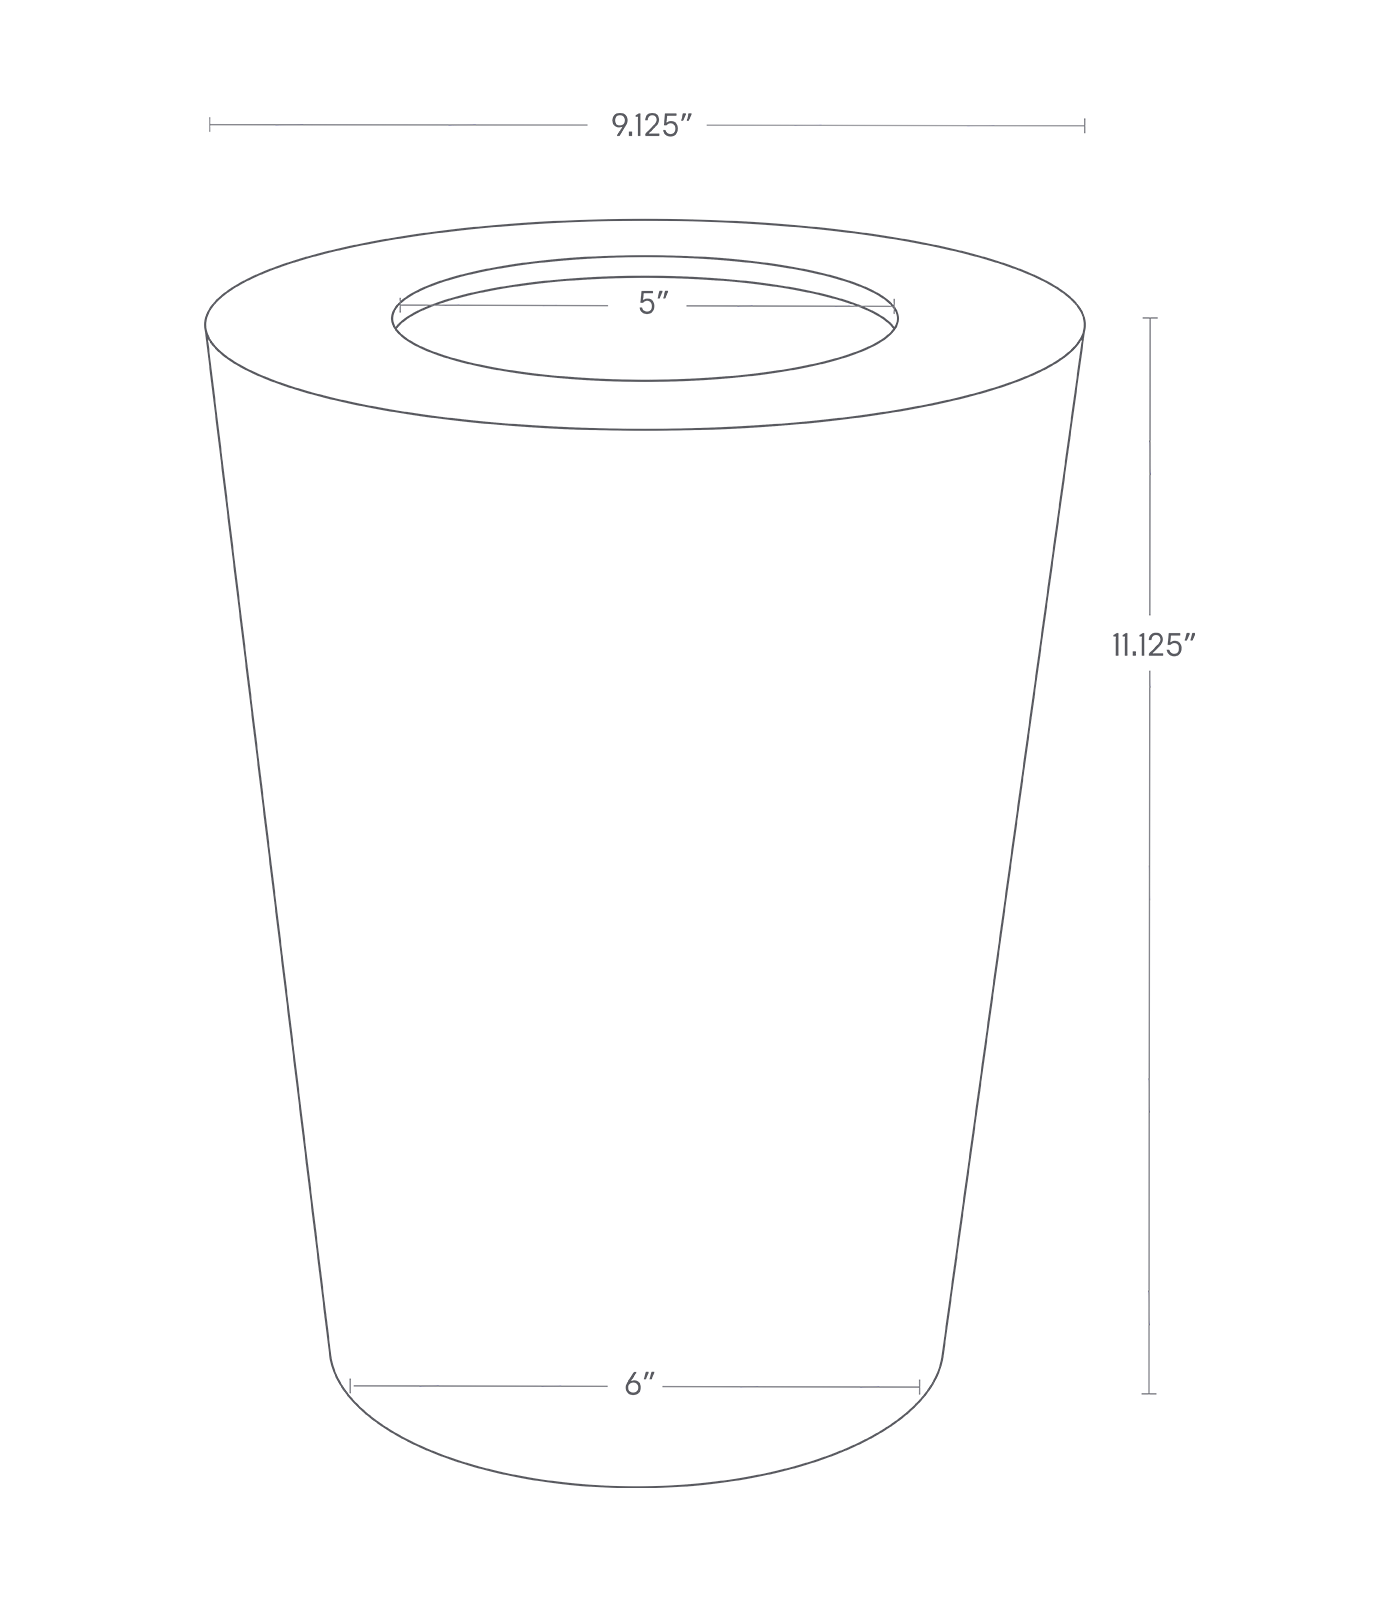 Dimension image for Trash Can - Round showing a bottom diameter of 6